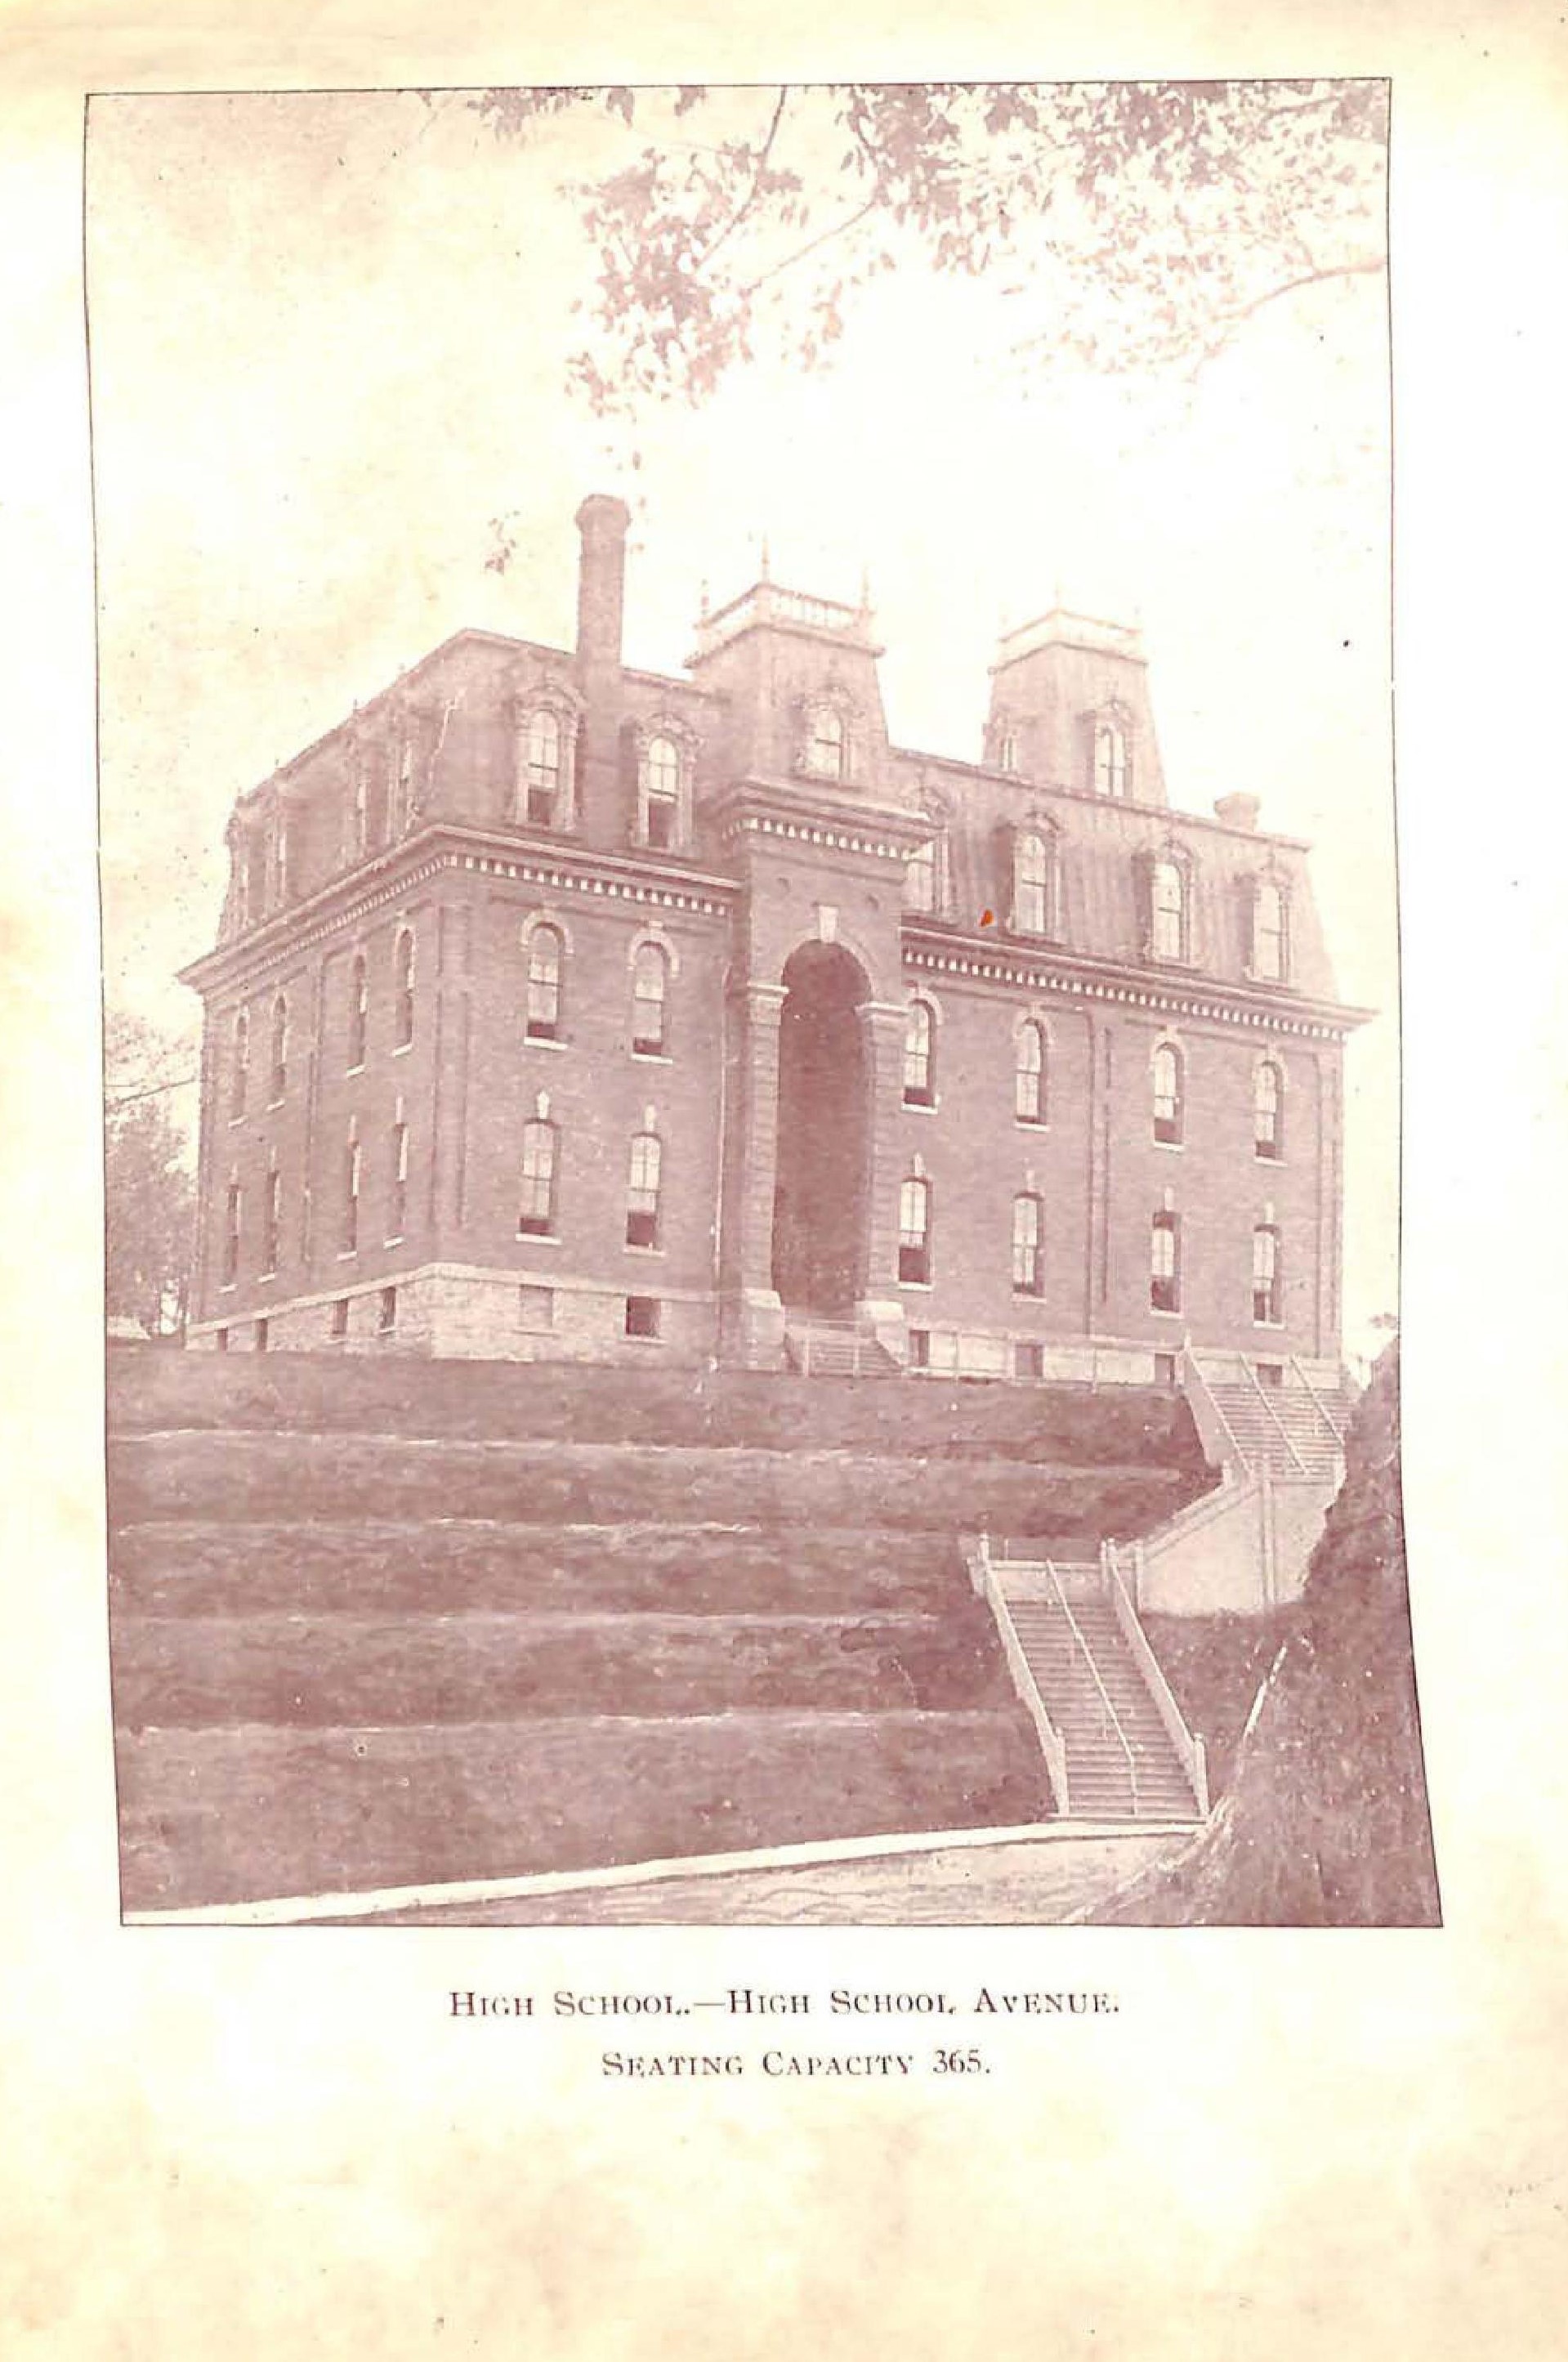 Photograph of the Council Bluffs High School from the 1897 senior annual